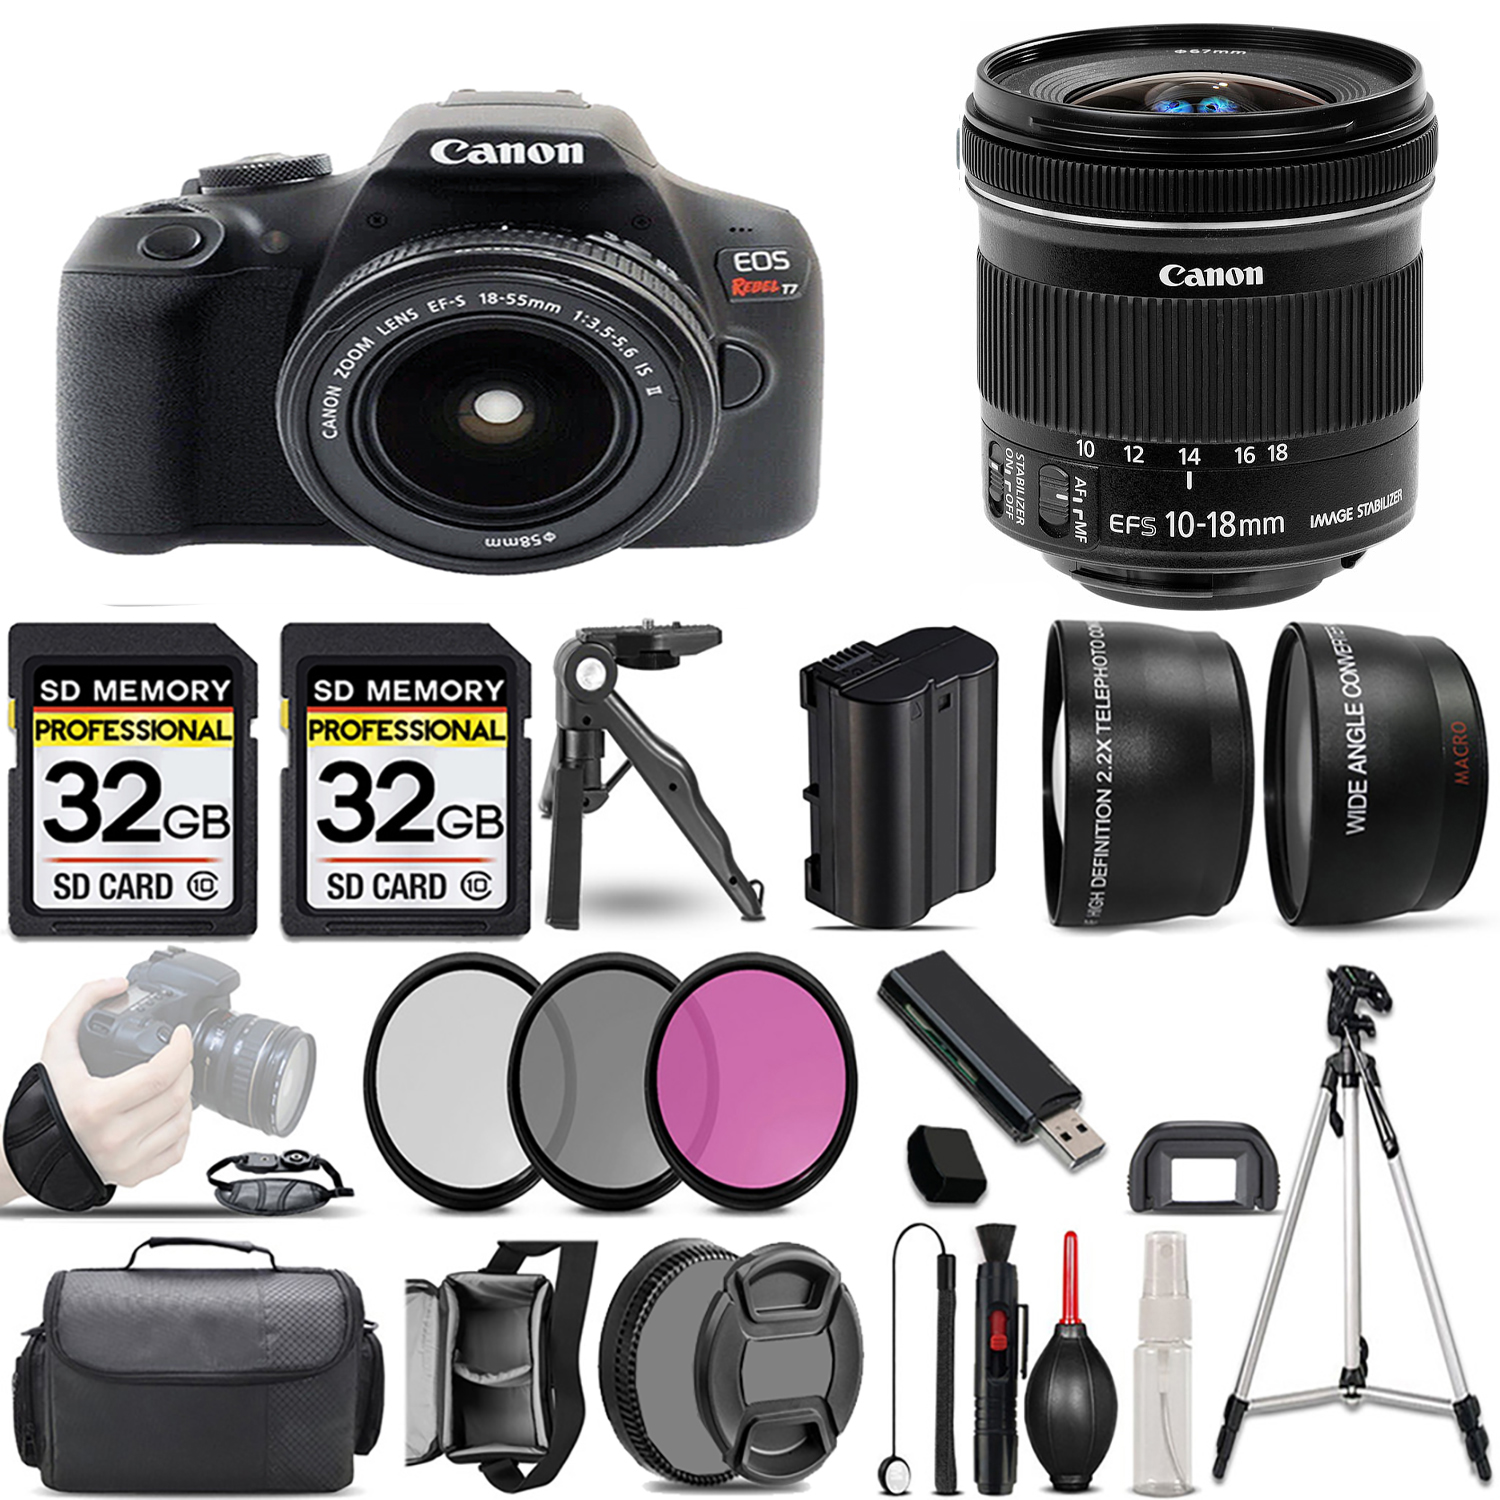 EOS Rebel T7 with 18-55mm Lens + 10-18mm IS STM Lens + 3 Piece Filter Set + 64GB *FREE SHIPPING*